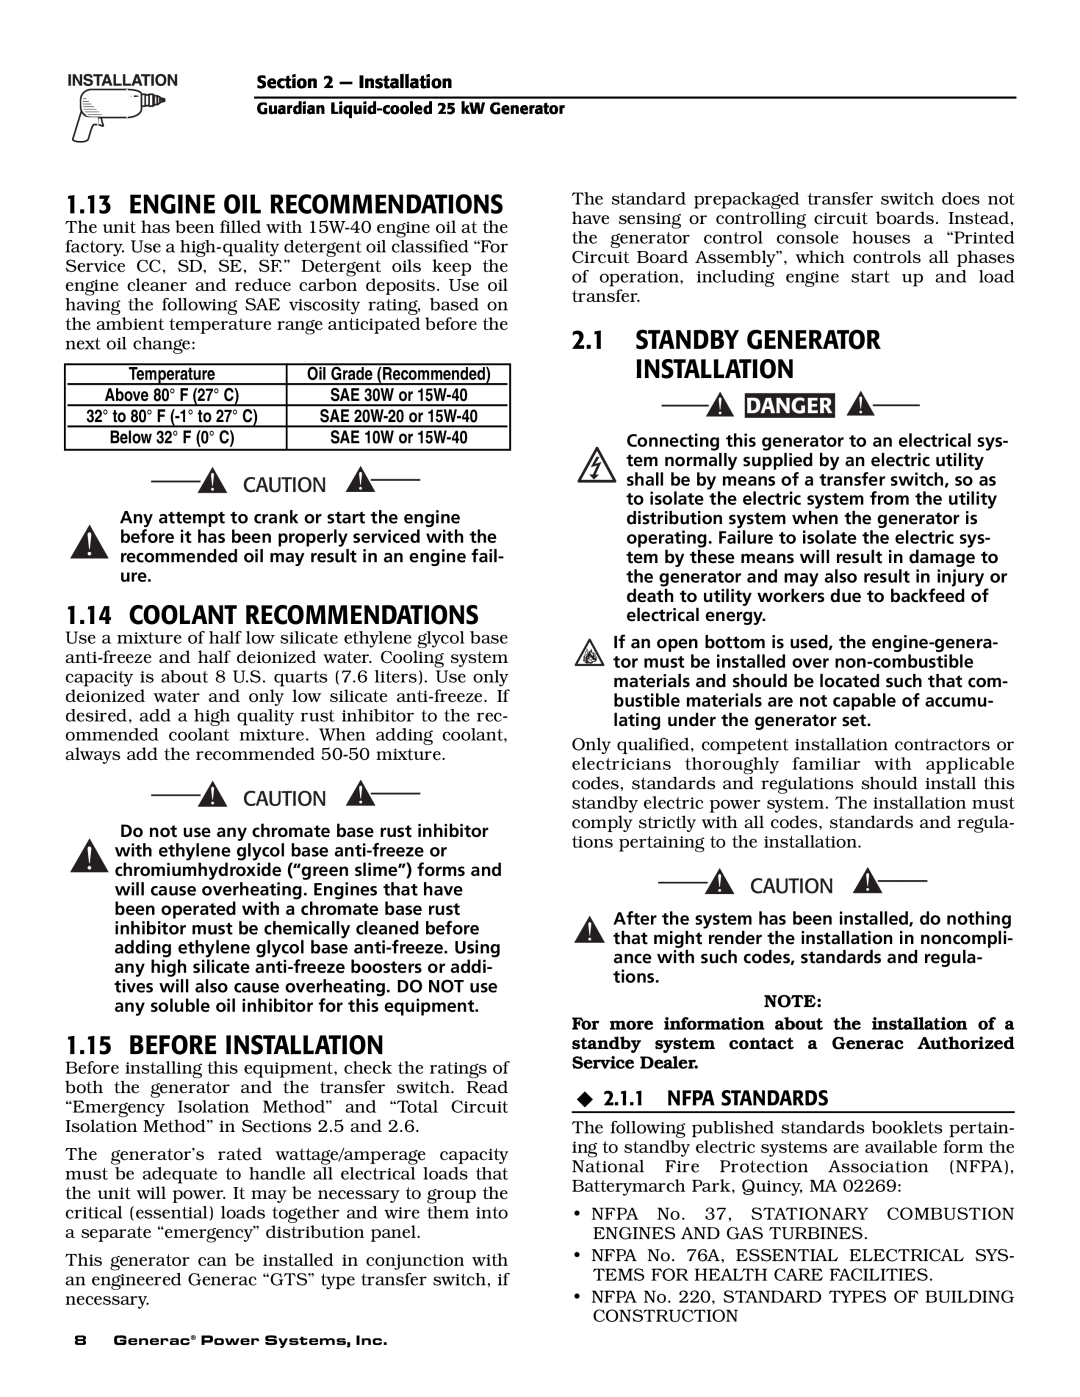 Generac Power Systems 005040-1, 005053-1 Engine Oil Recommendations, Coolant Recommendations, Before Installation, Danger 